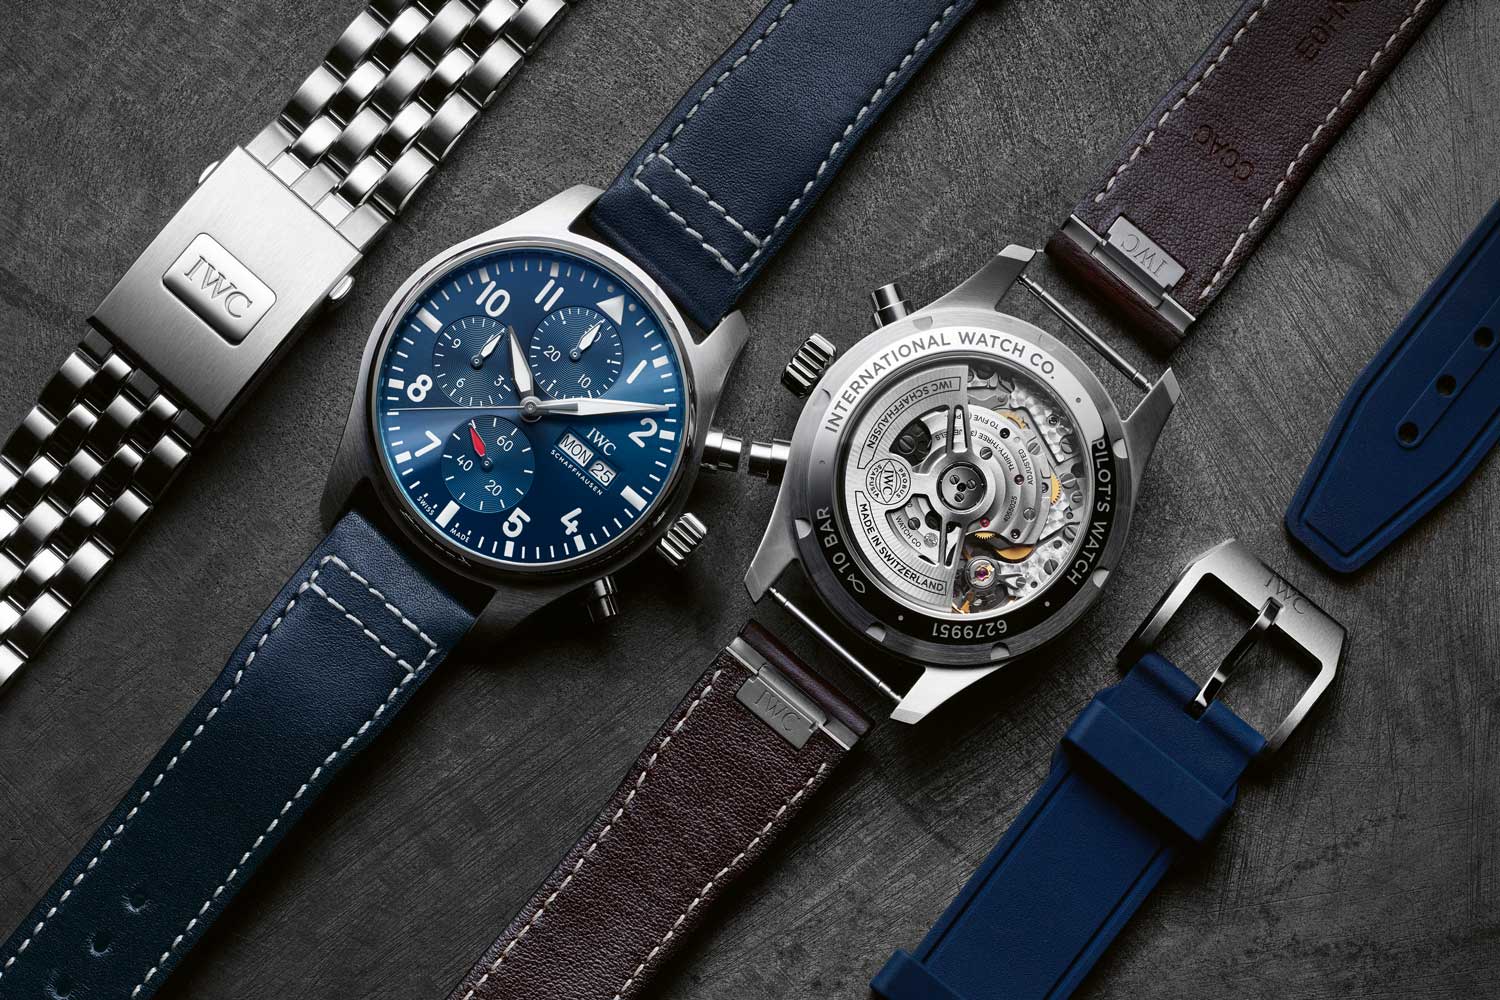 New models of the IWC Pilot’s Watches are equipped with the EasX-CHANGE system, which allows the watch owner to quickly and easily change the strap or bracelet — all it requires is gentle pressure on the button with the IWC logo, and a light tug and push of the strap or bracelet